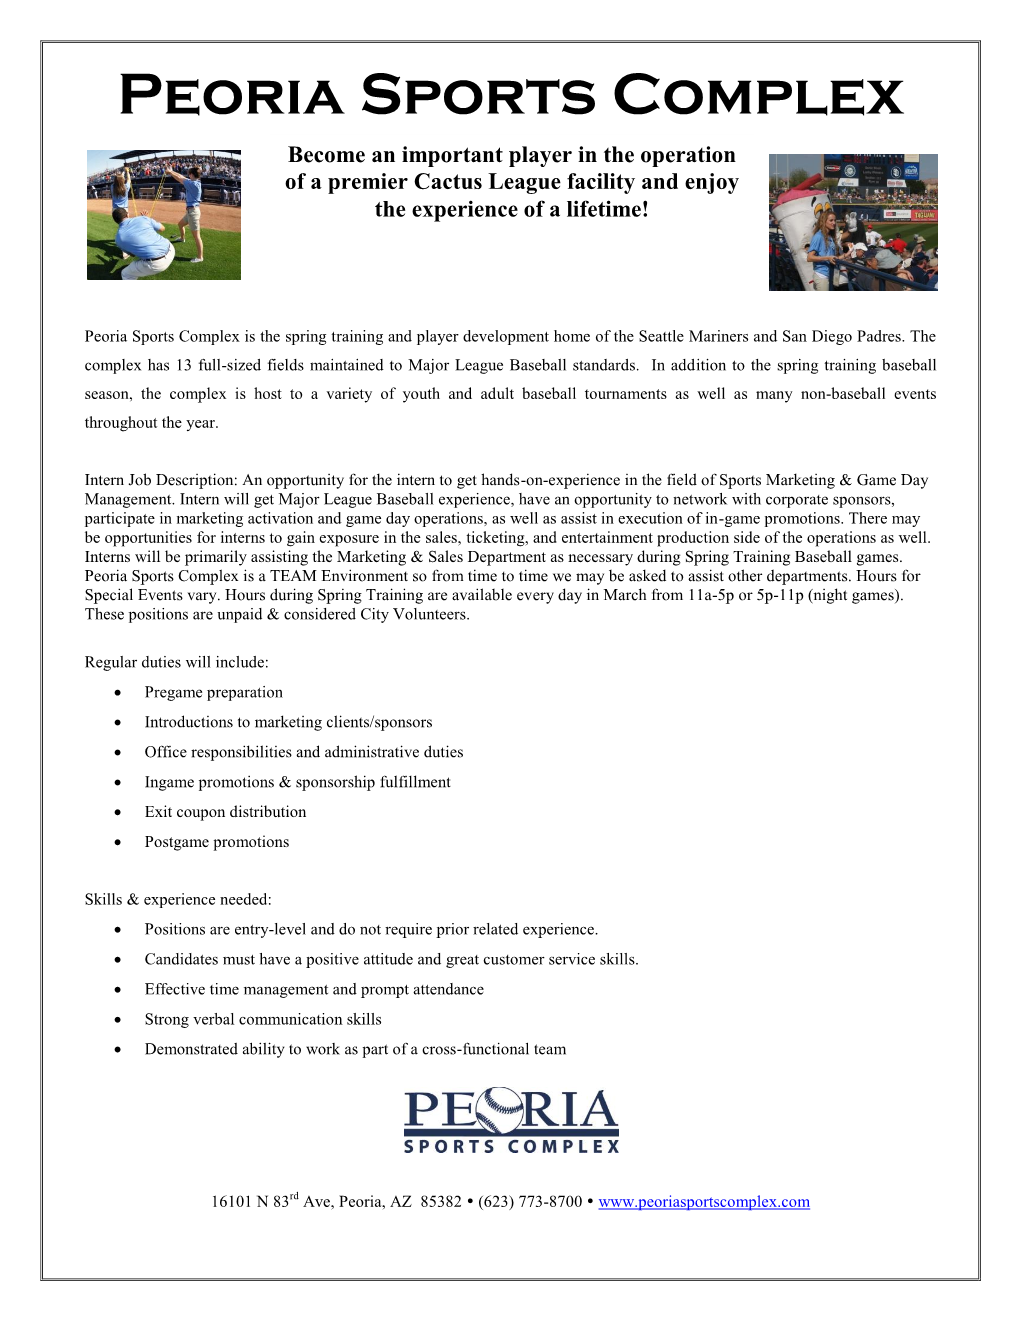 Join the Team at the Peoria Sports Complex and Become an Important